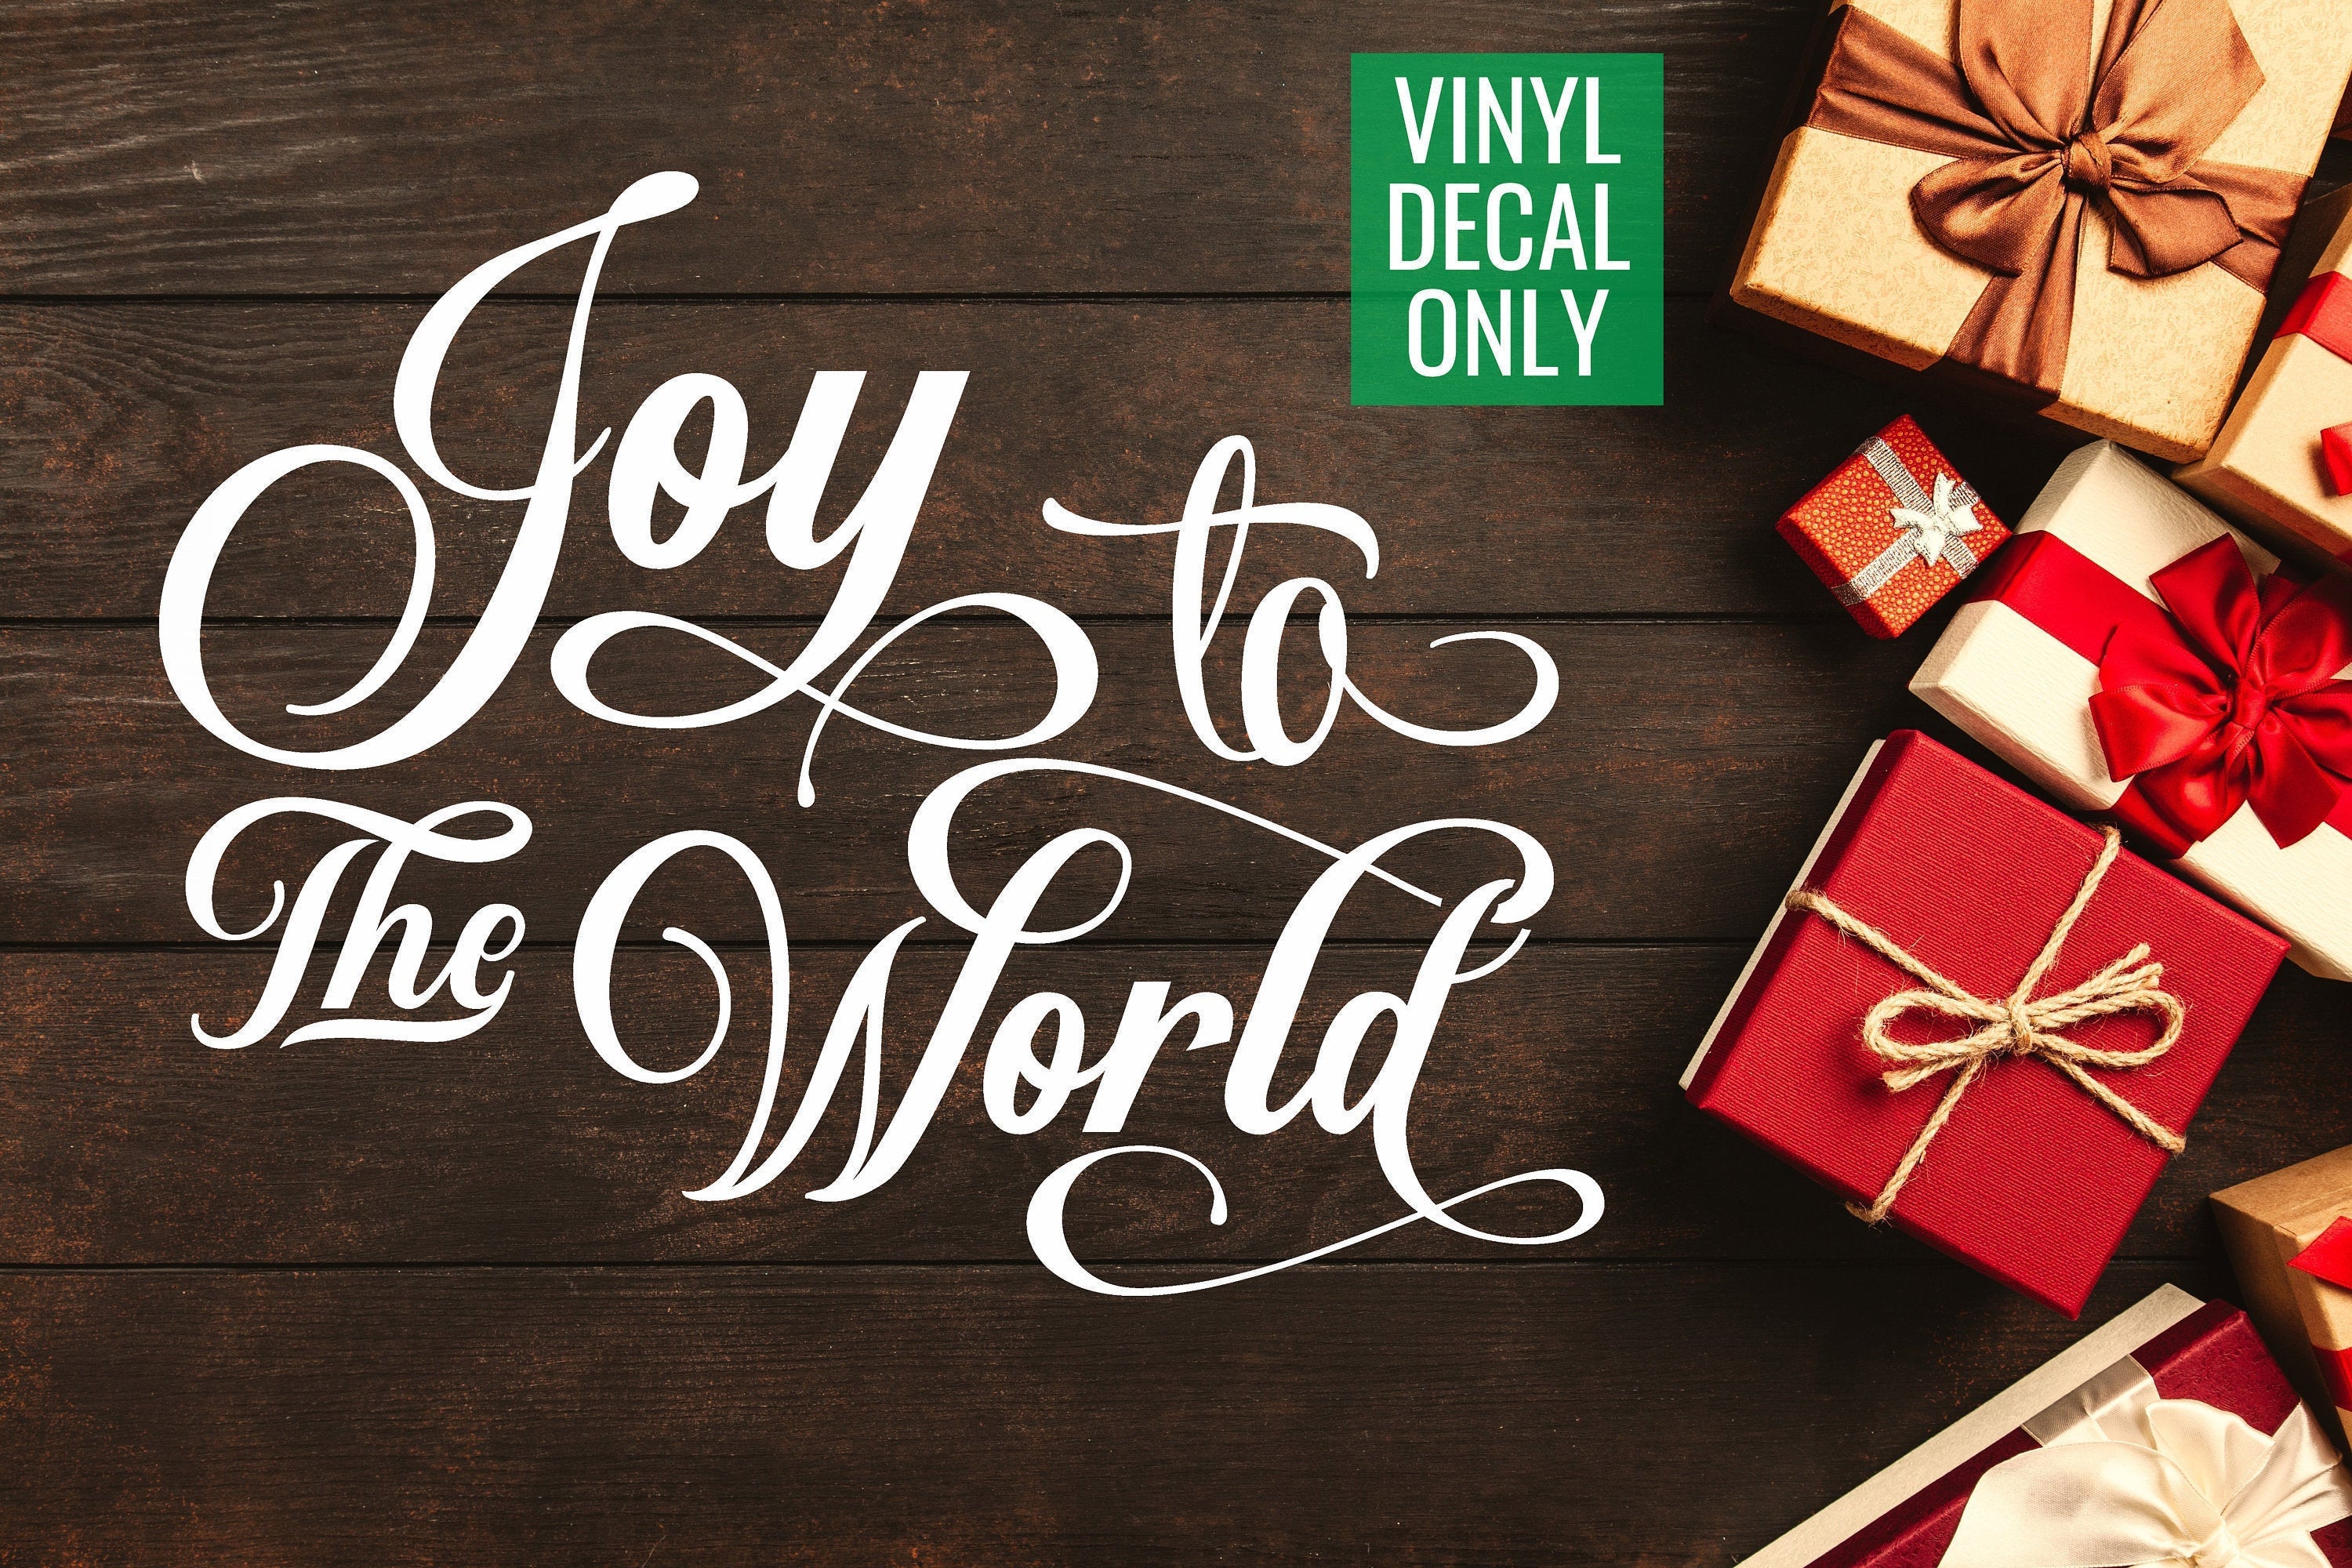 Joy to the World Vinyl Decal Walls, Signs, Ornaments, Other Smooth Surfaces, Christmas Decor for Parties & Events,